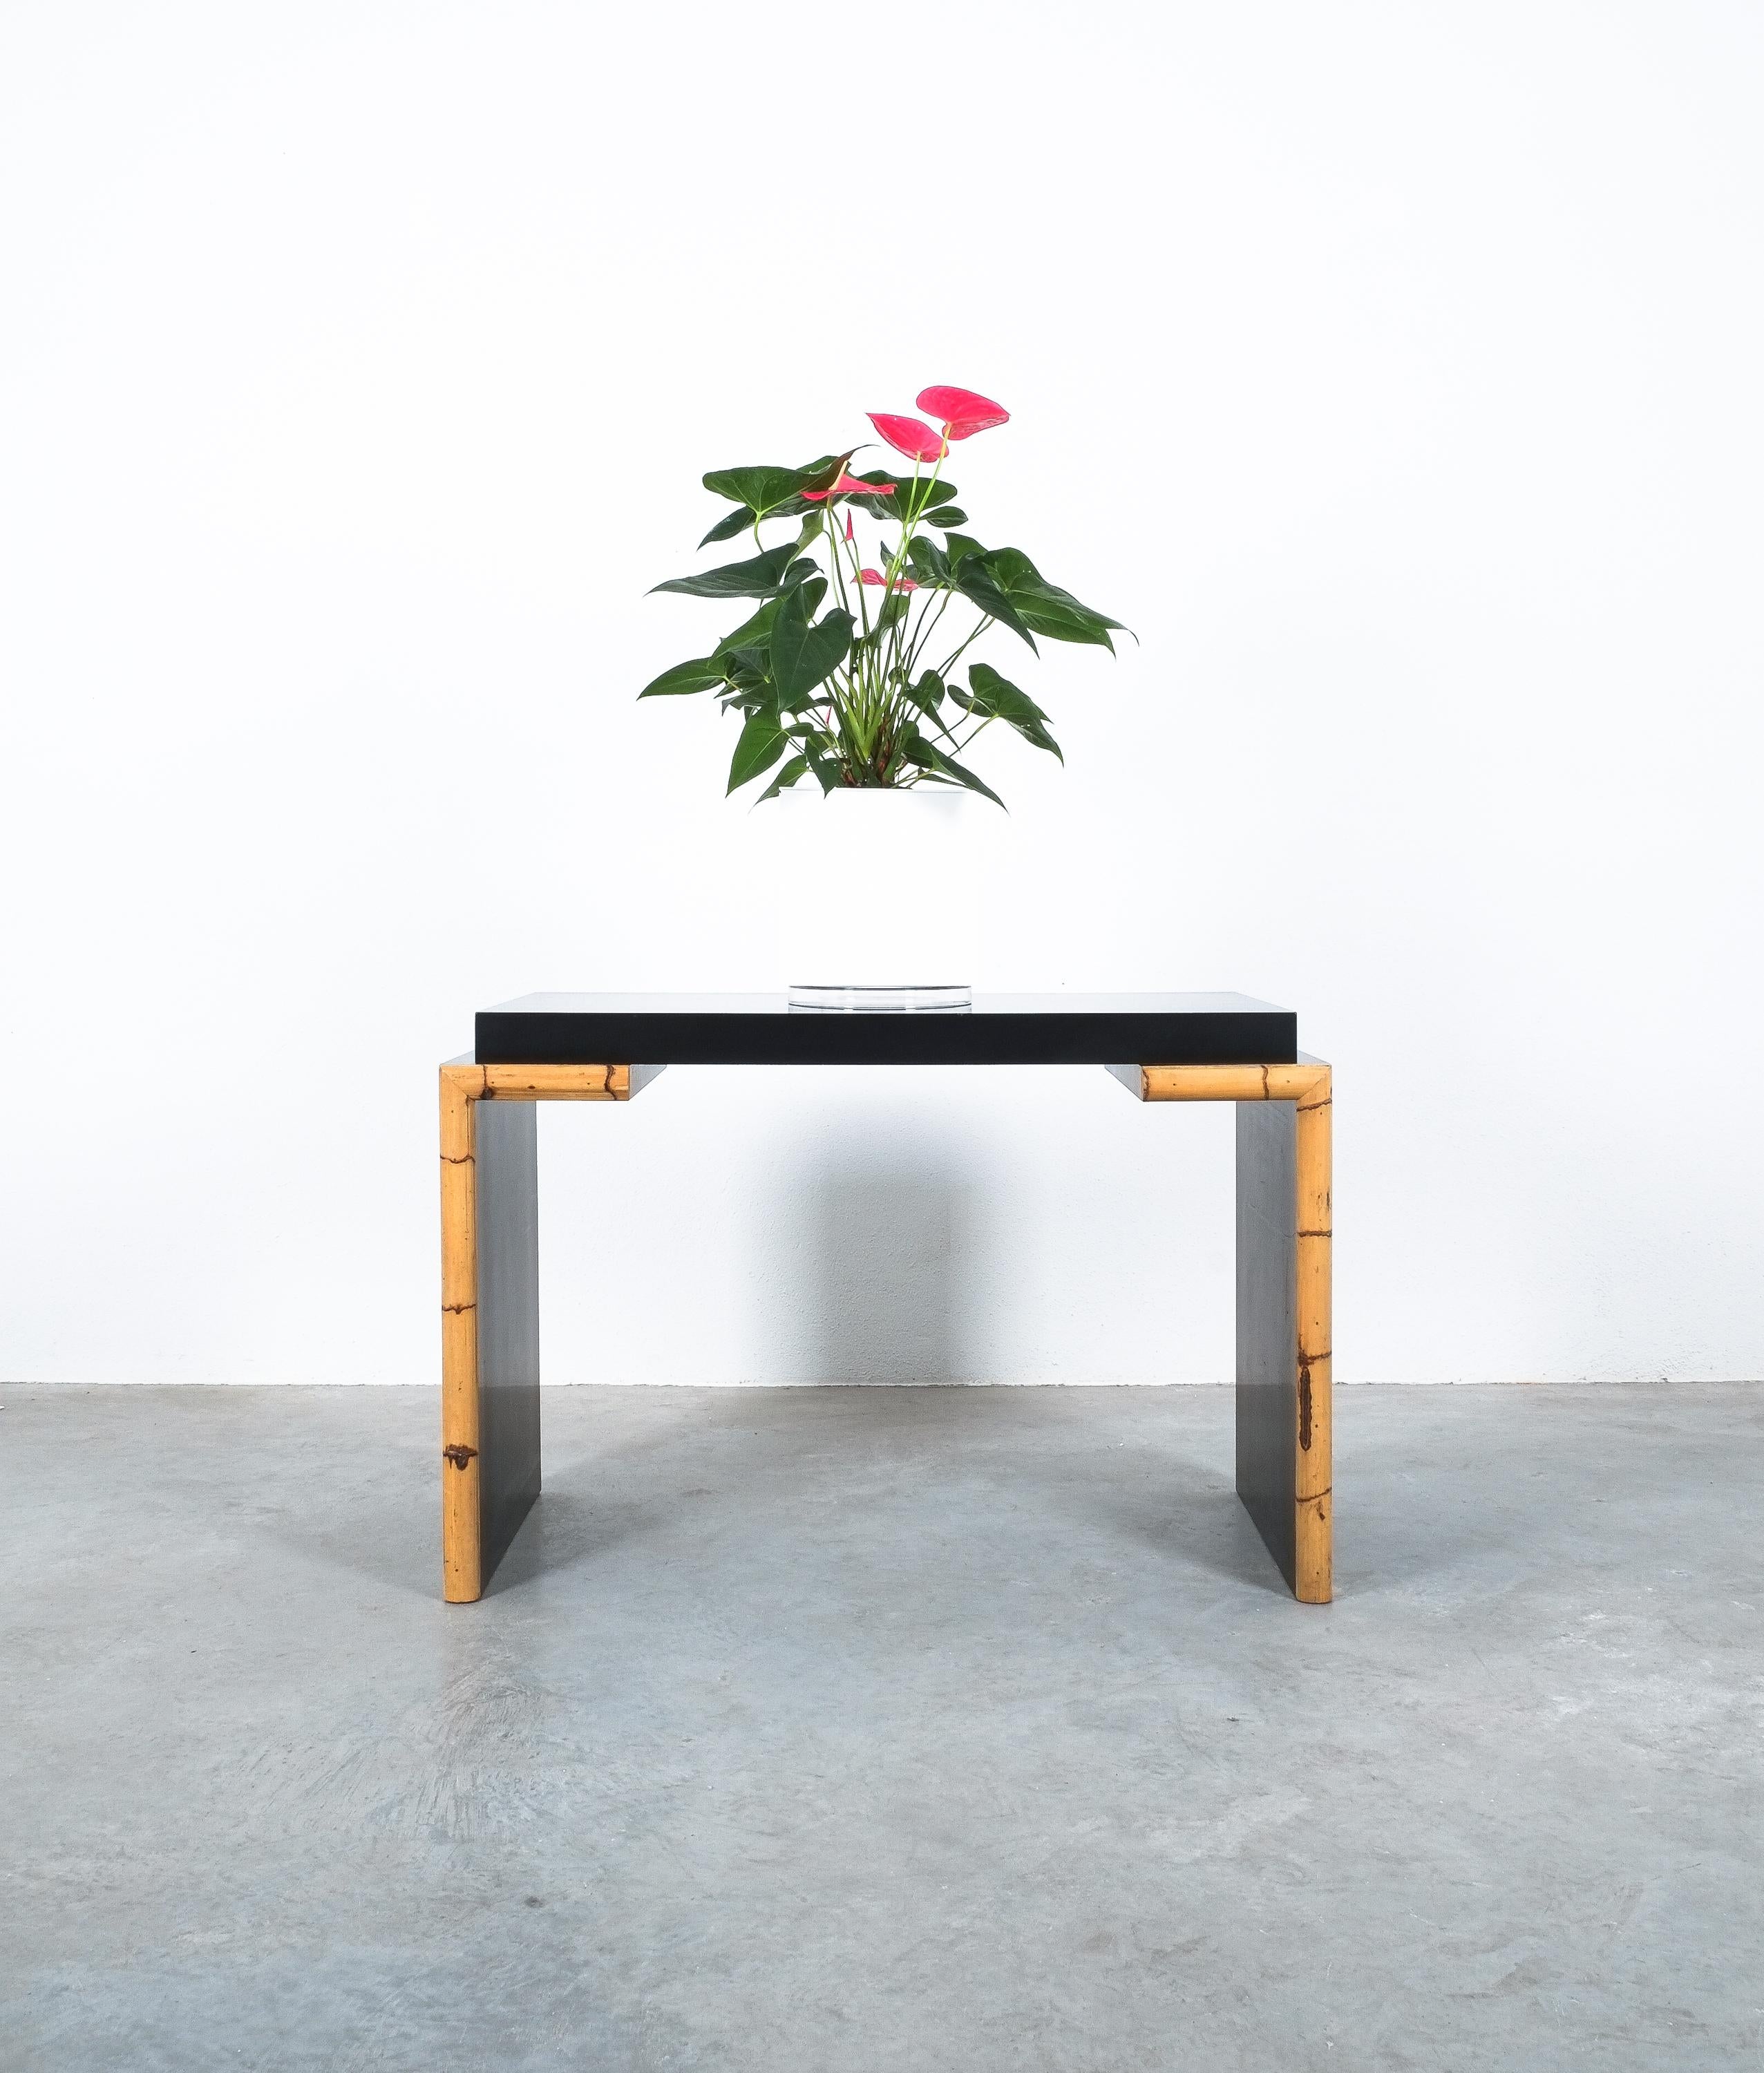 Black Formica bamboo desk, Italy, circa 1985

A Postmodern small table perfect and stylish for any daily accomplishments. Comprised of Formica on wood with bamboo decor this desk certainly was greatly inspired by radical design approached from the